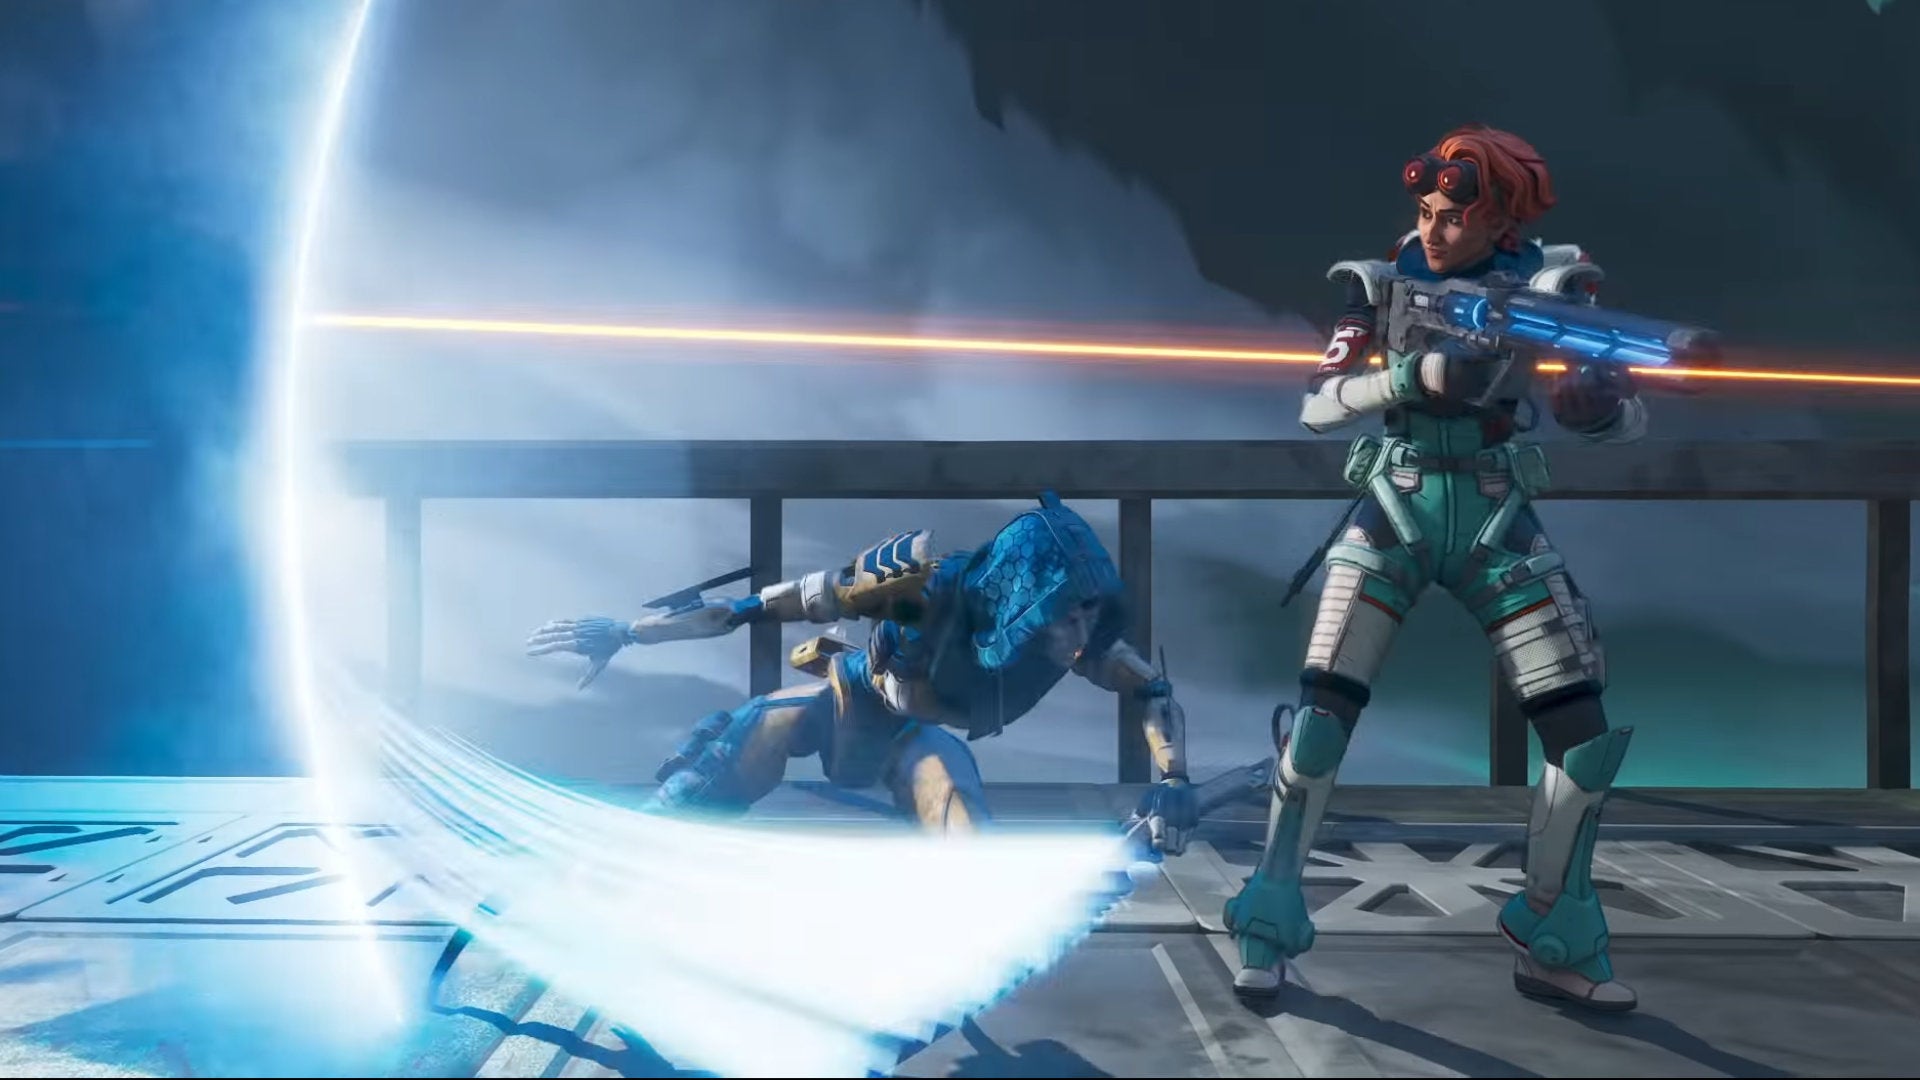 From an Apex Legends cinematic: Ash rushes out of her Ultimate ability portal to attack Horizon from behind.